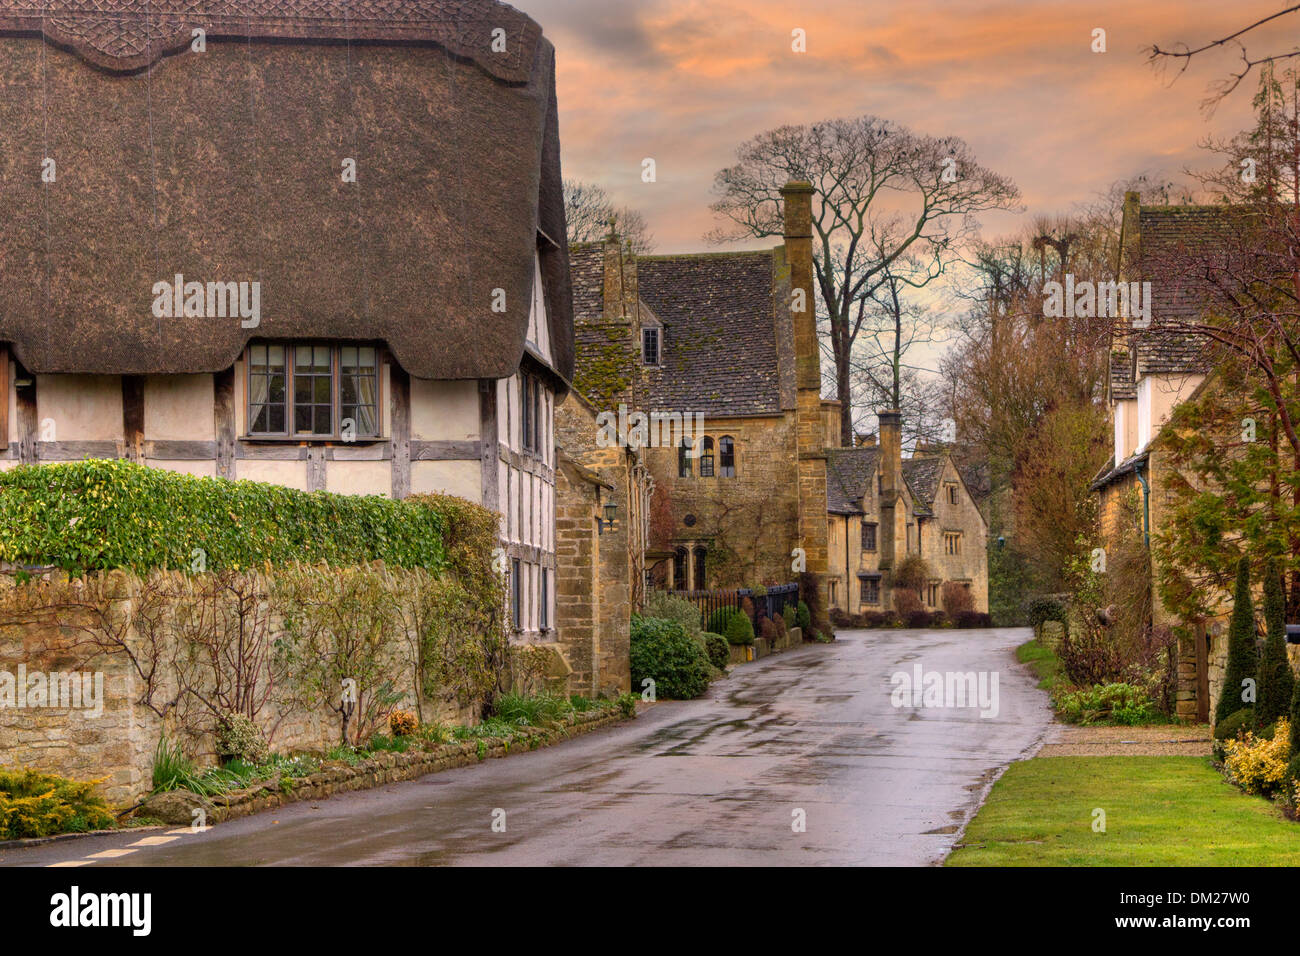 Pretty architecture at Stanton, Gloucestershire, England. Stock Photo